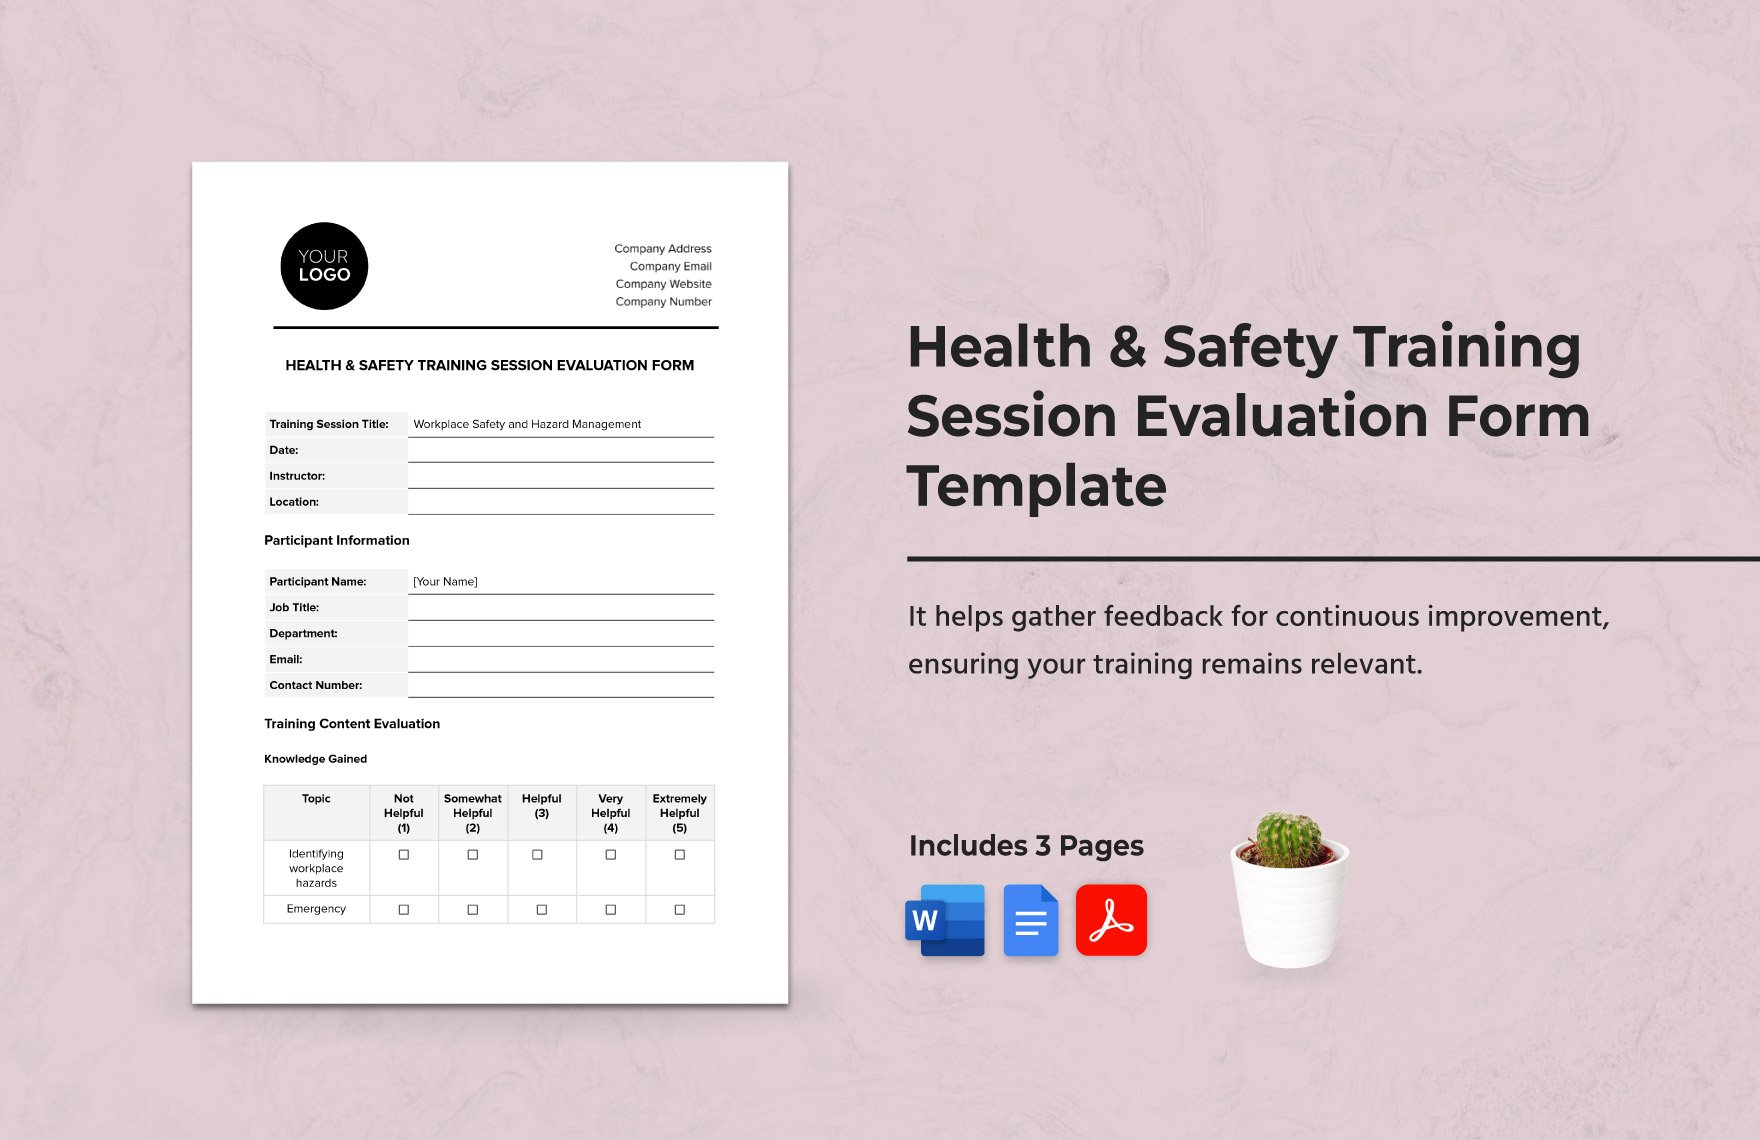 Health & Safety Training Session Evaluation Form Template in Word, Google Docs, PDF